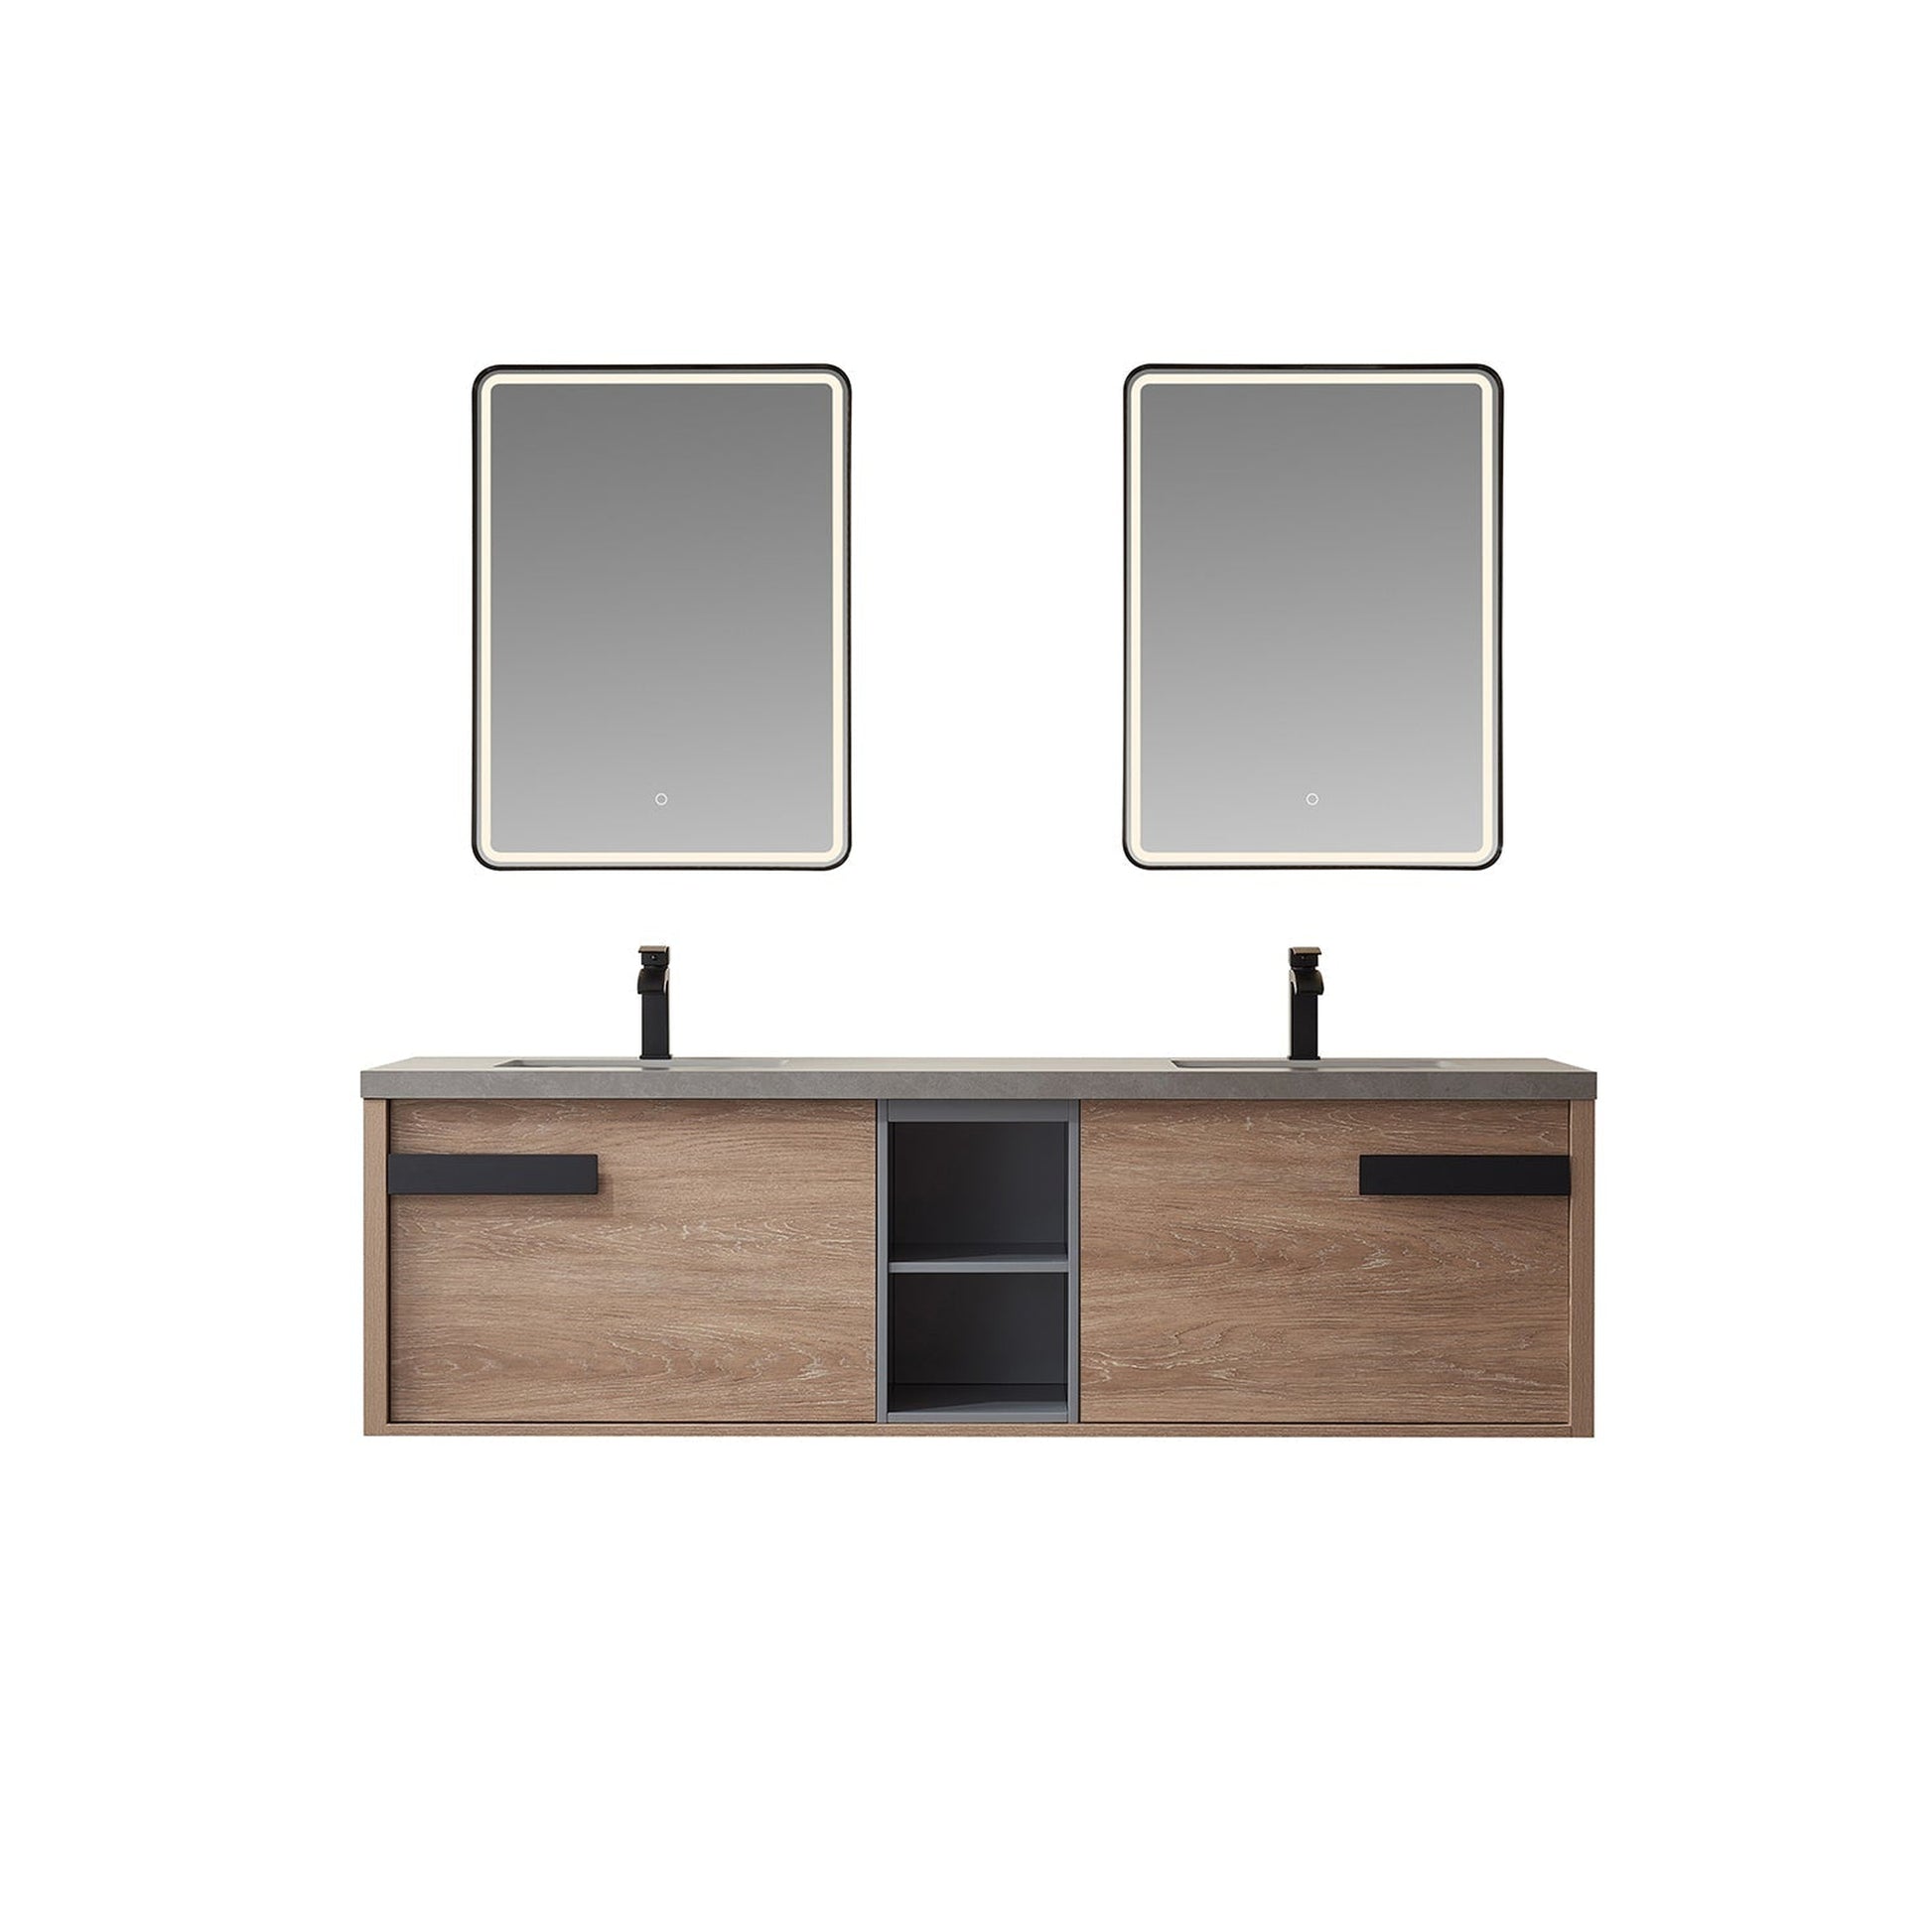 Vinnova Carcastillo 72" Double Sink Bath Vanity In North American Oak And Matte Black Hardware Finish With Grey Sintered Stone Top And Mirror